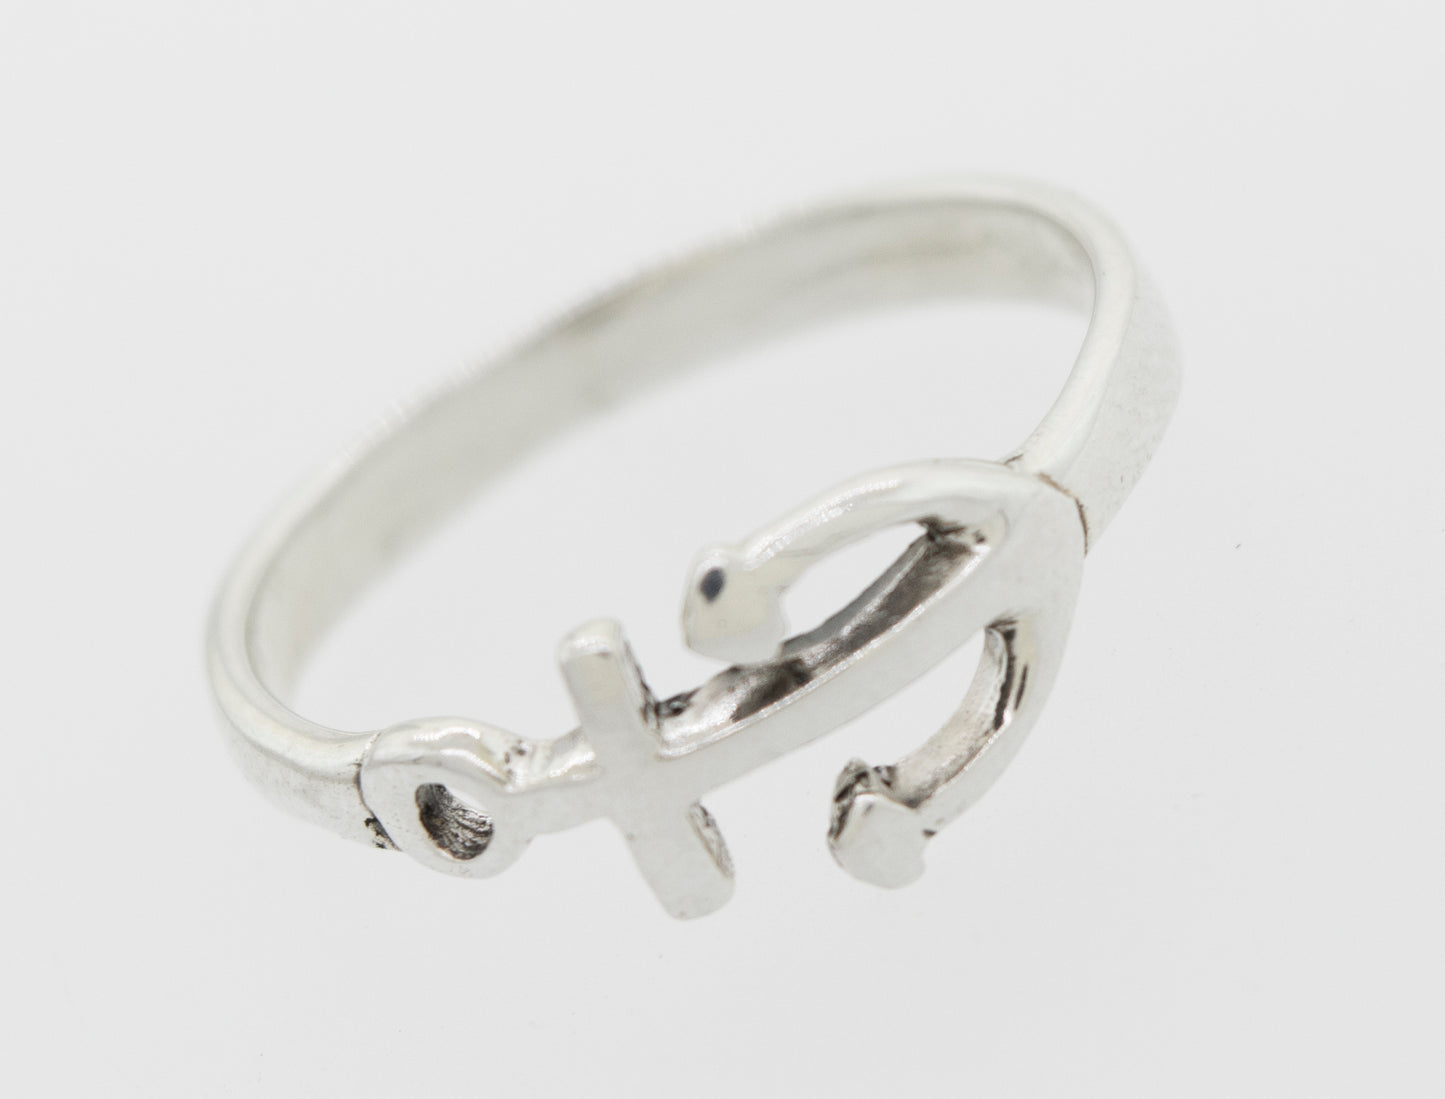 A Super Silver Delicate Anchor Ring featuring a horizontal anchor, perfect for ocean lovers.